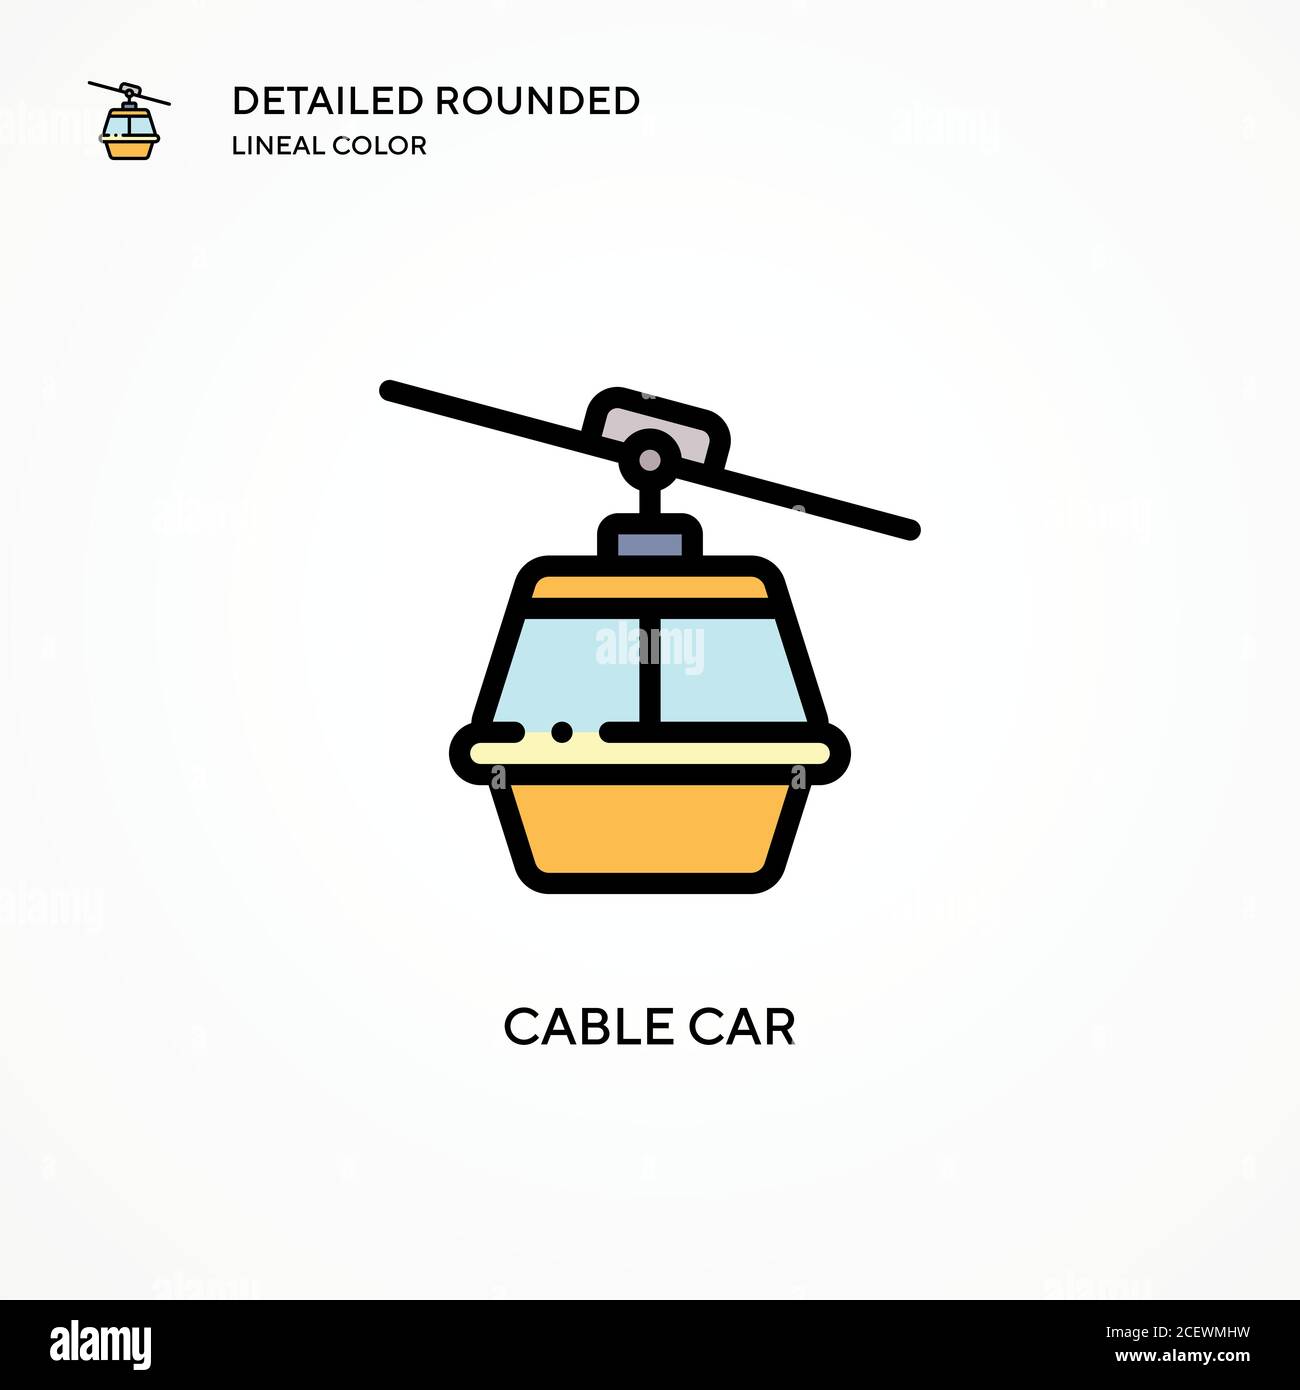 Cable car vector icon. Modern vector illustration concepts. Easy to edit and customize. Stock Vector